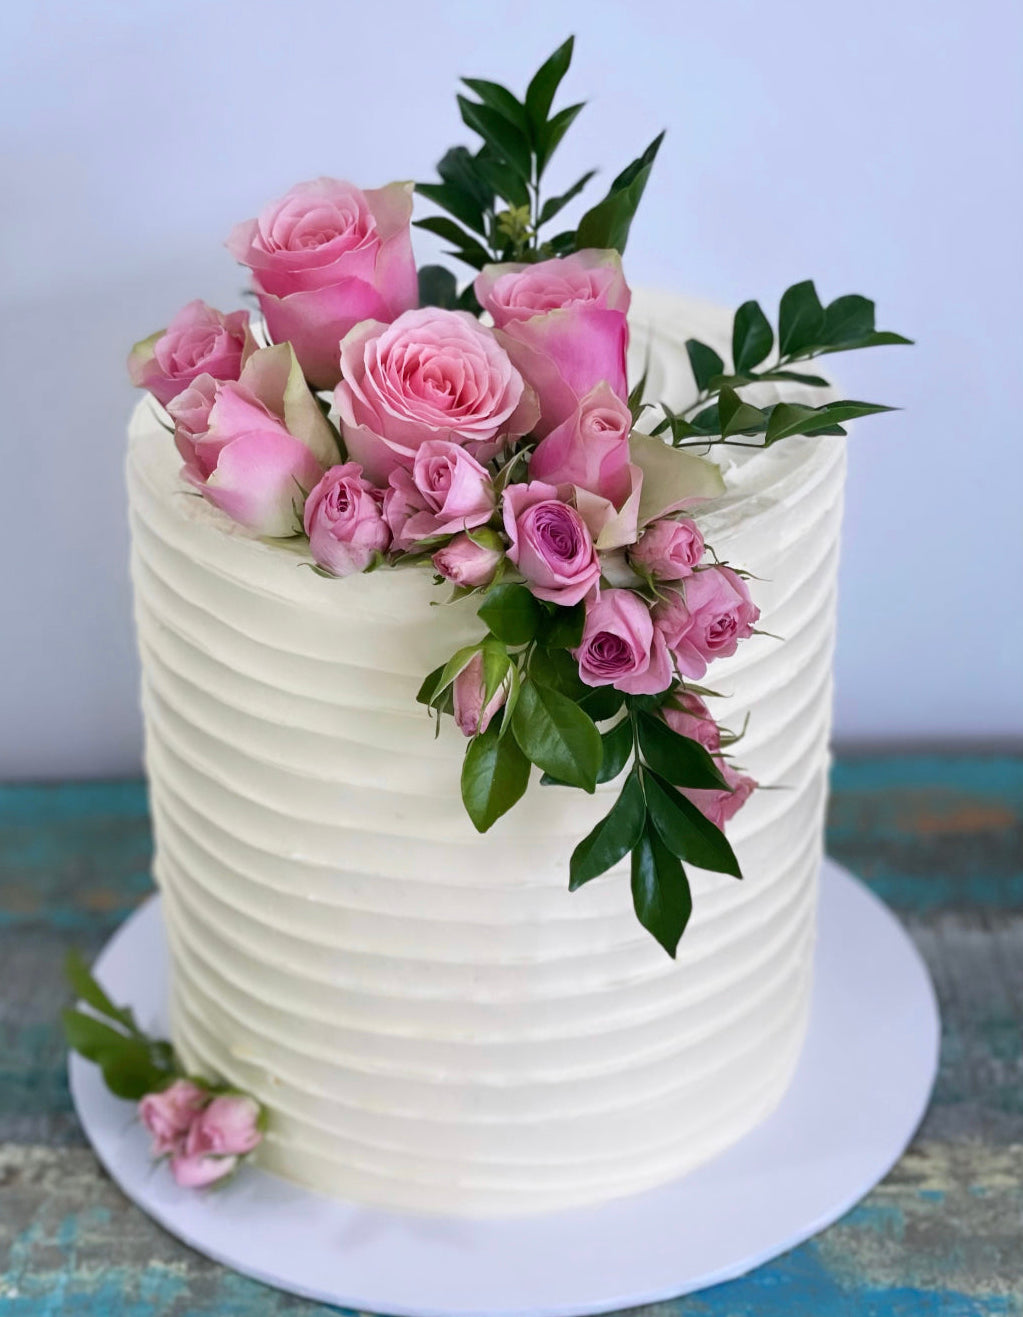 Butterfly Spiral FLoral Cake - Dough and Cream